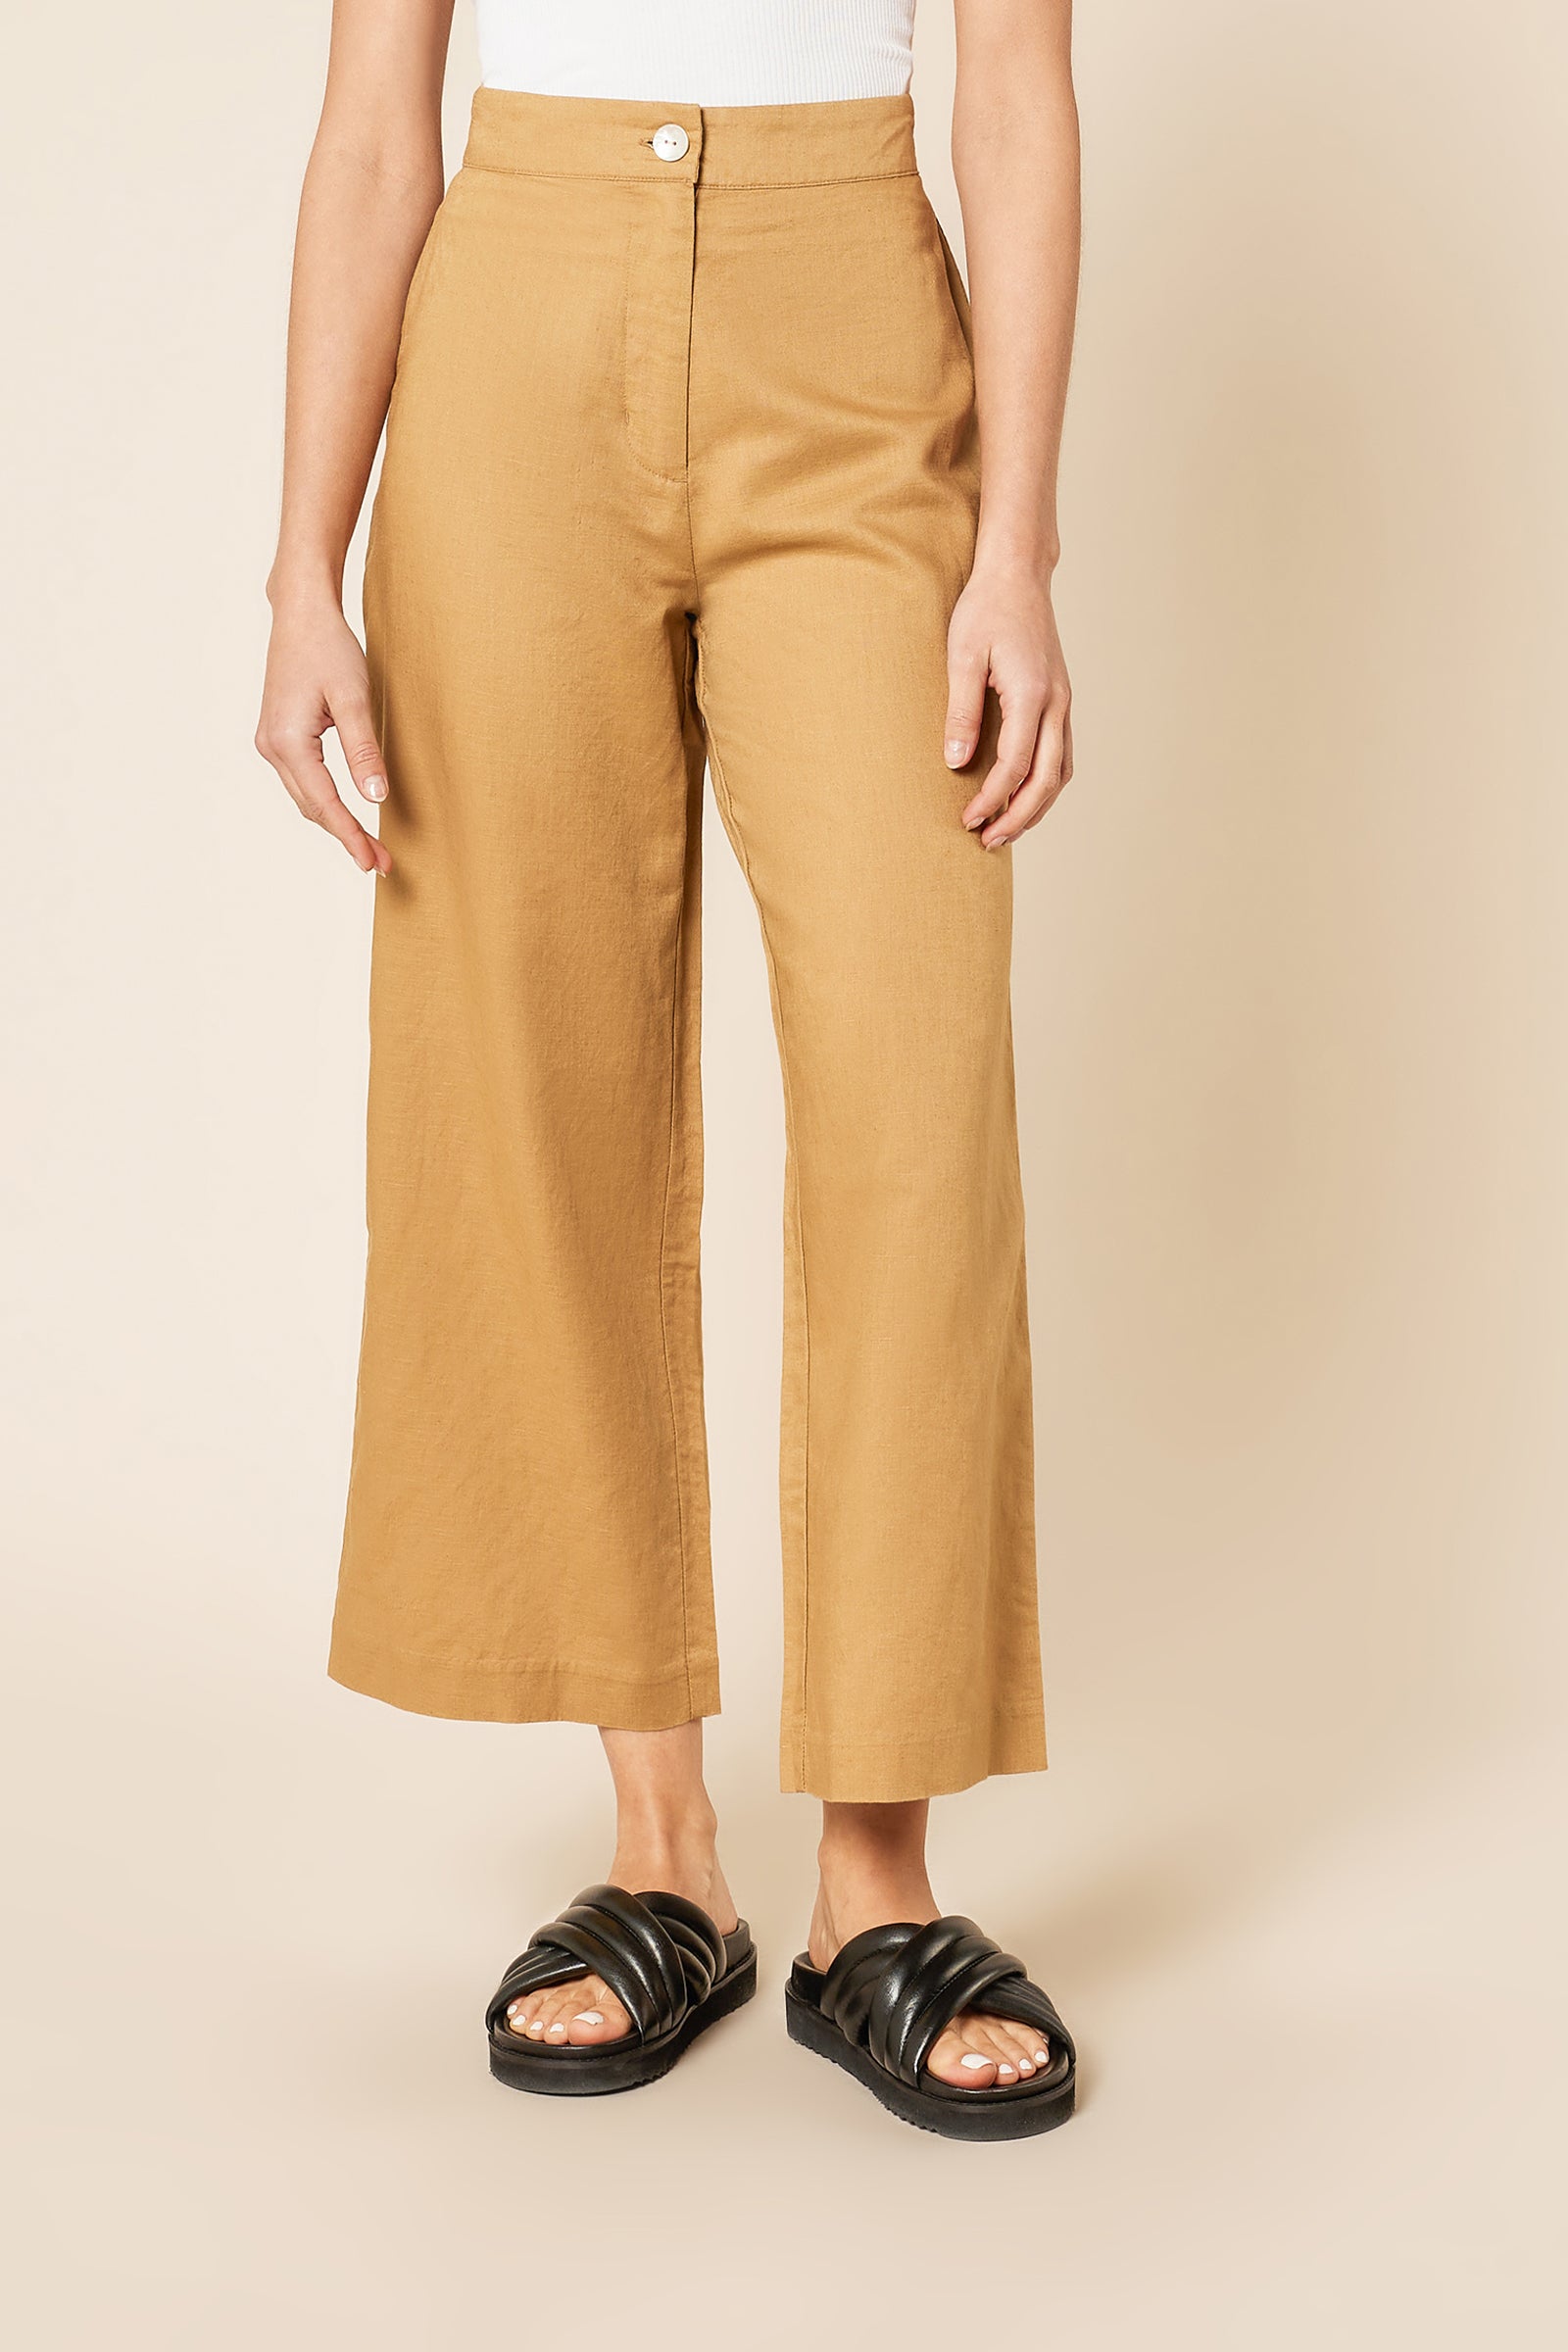 Nude Lucy Drew Pant In A Brown Oak Colour 